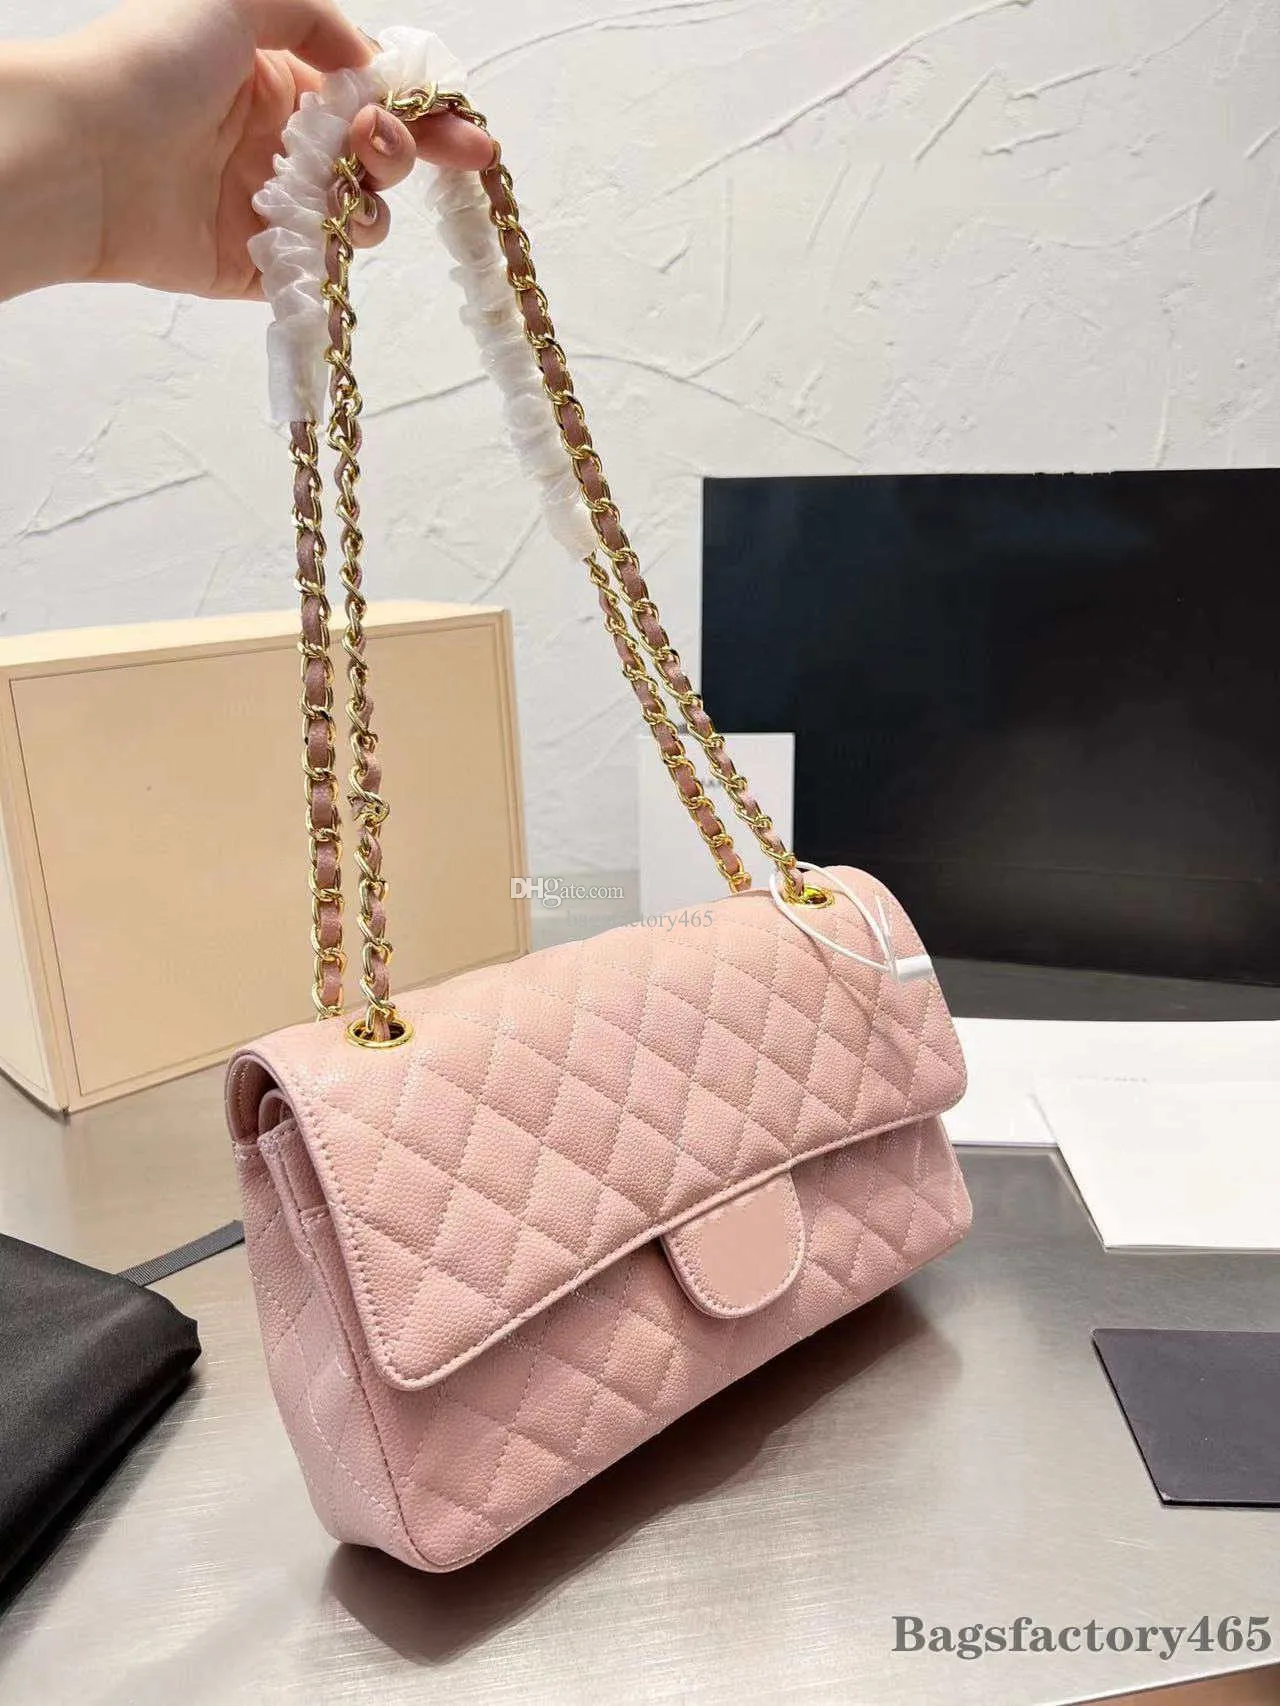 dhgate bags chanel